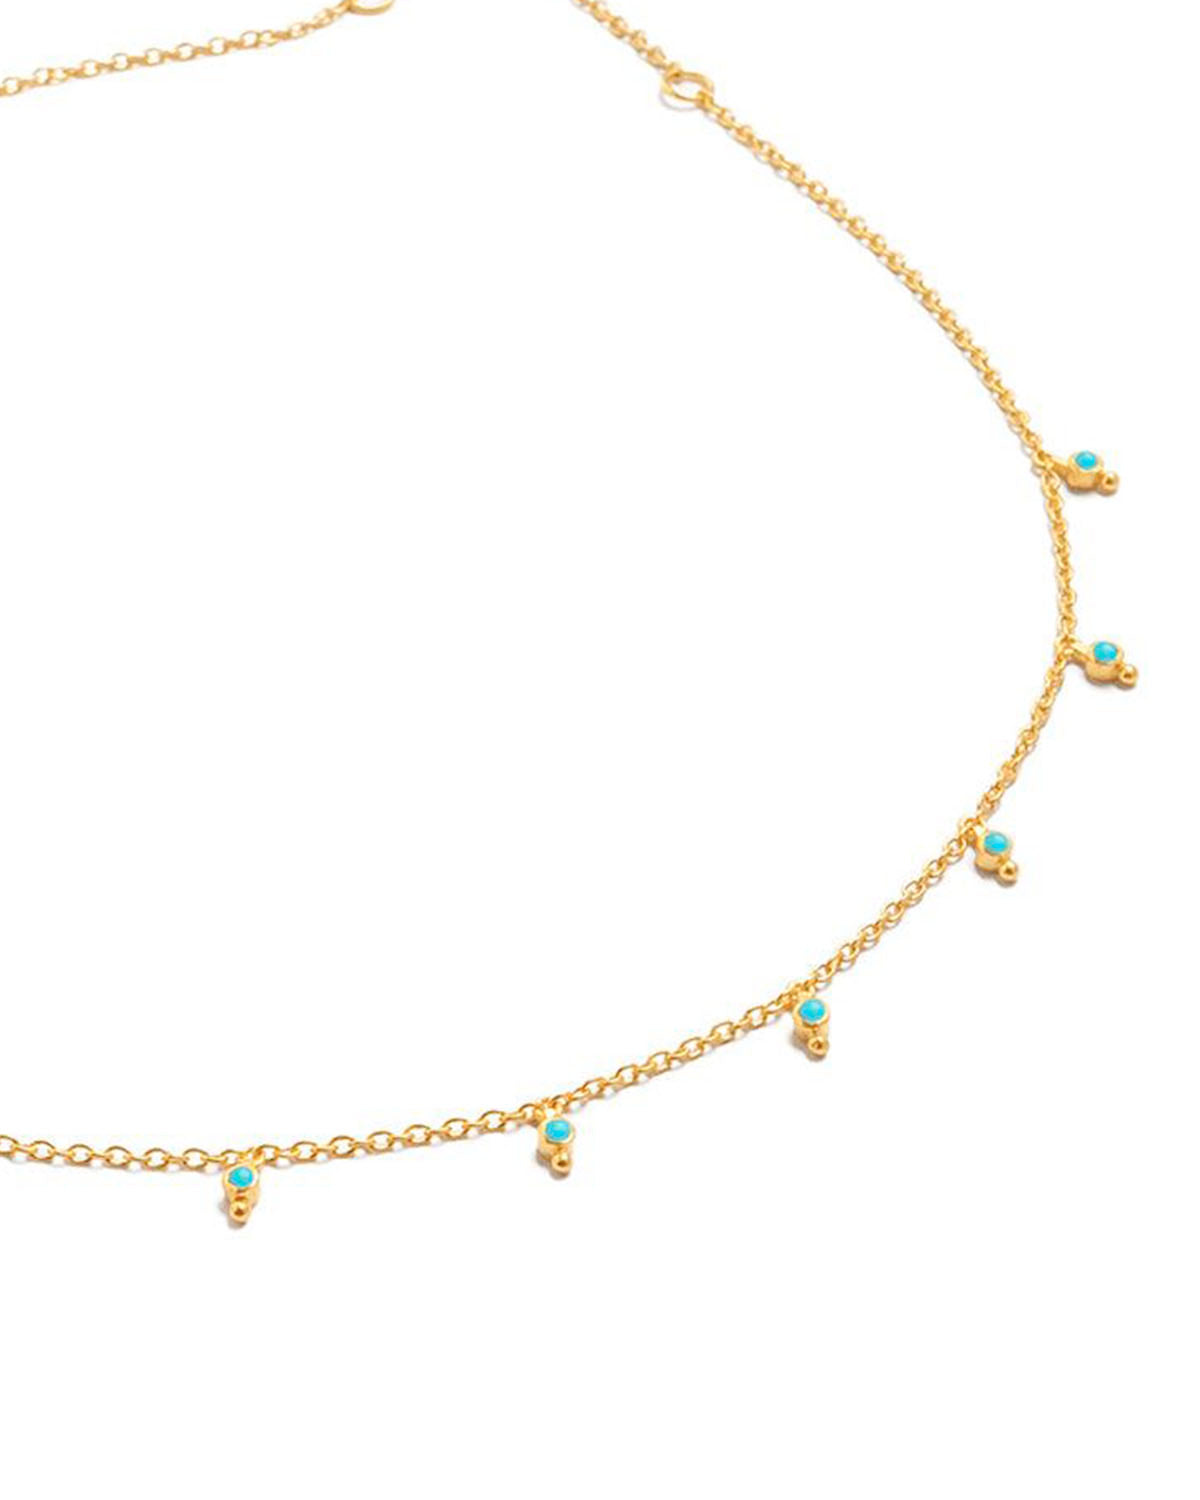 Super Paver Turquoise Gold Necklace - Moon London